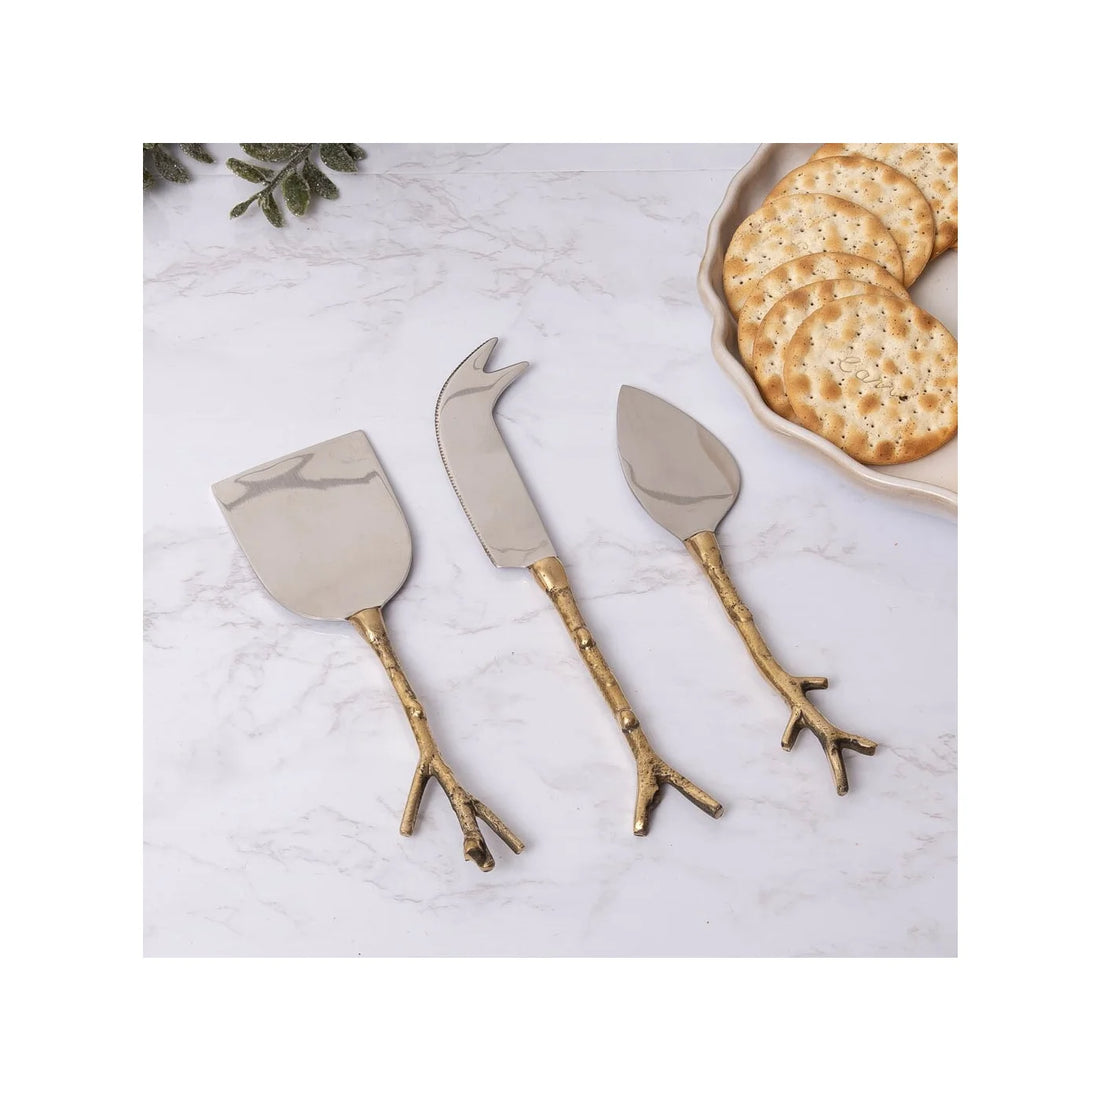 Boldly Spread Cheese with Twig Cheese Spreaders